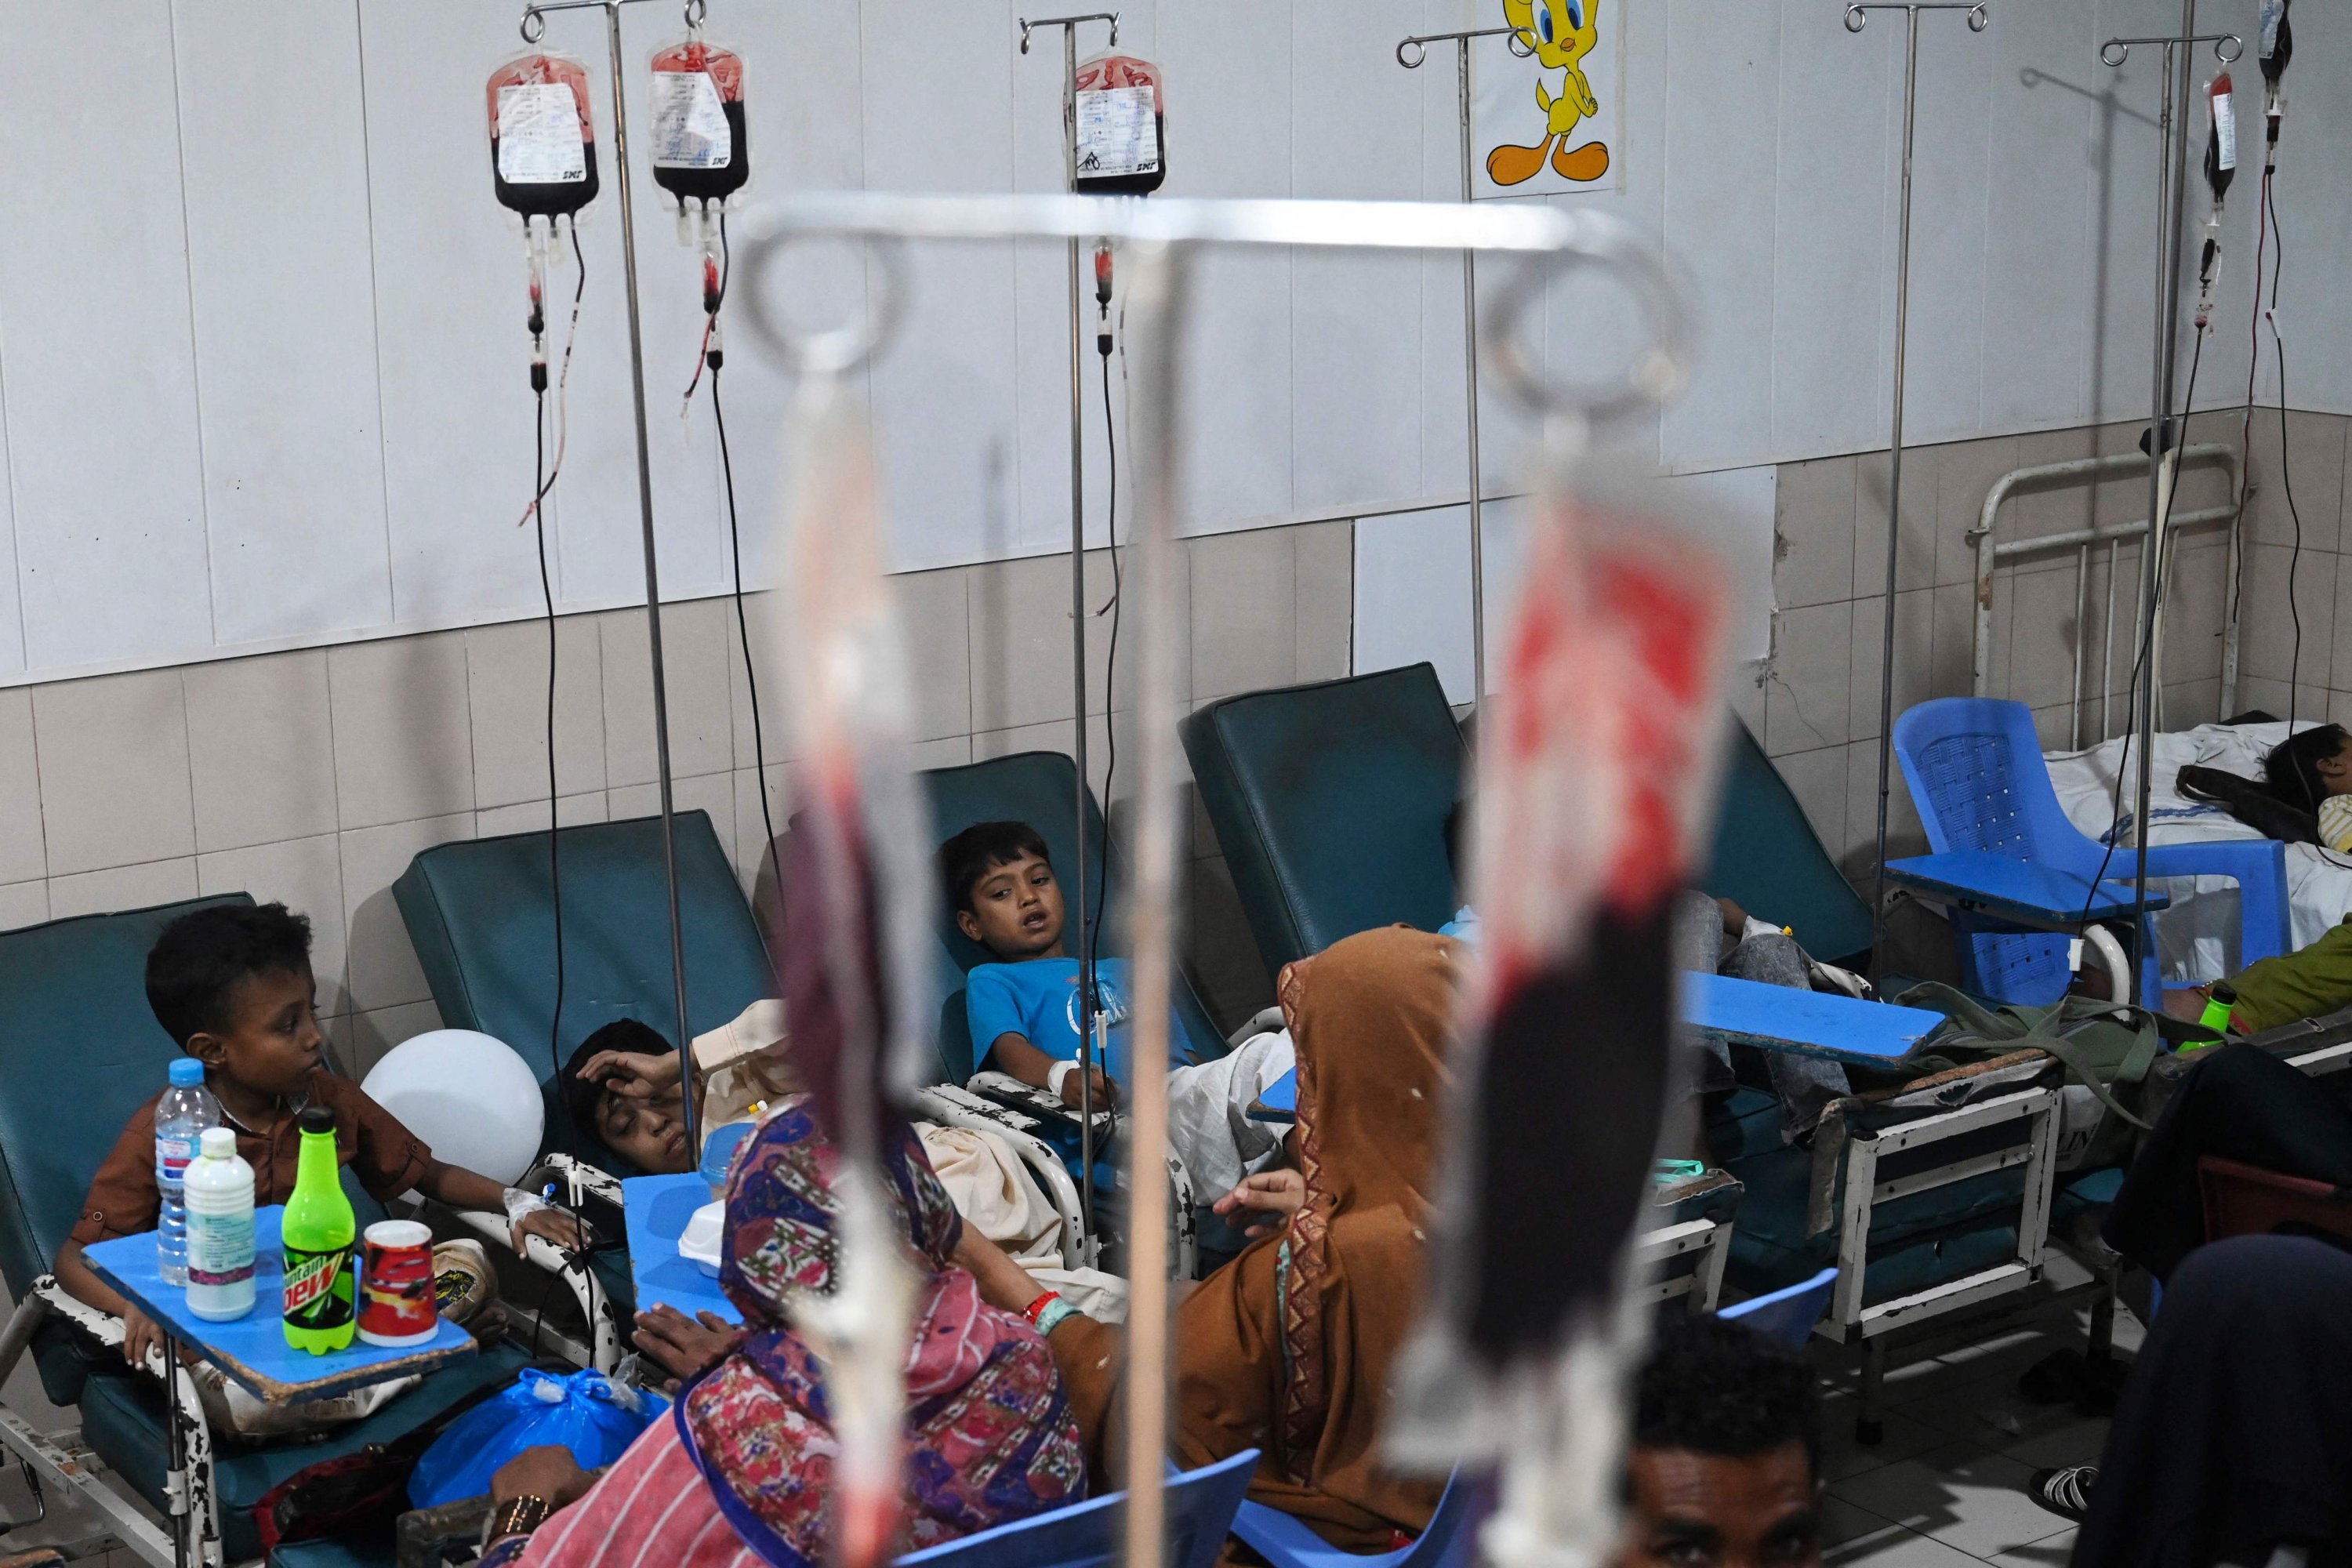 Children with thalassemia, an inherited blood disorder that causes the body to have lower levels of hemoglobin, receive a blood transfusion at a hospital in Lahore, Pakistan, May 7, 2022. (AFP Photo)